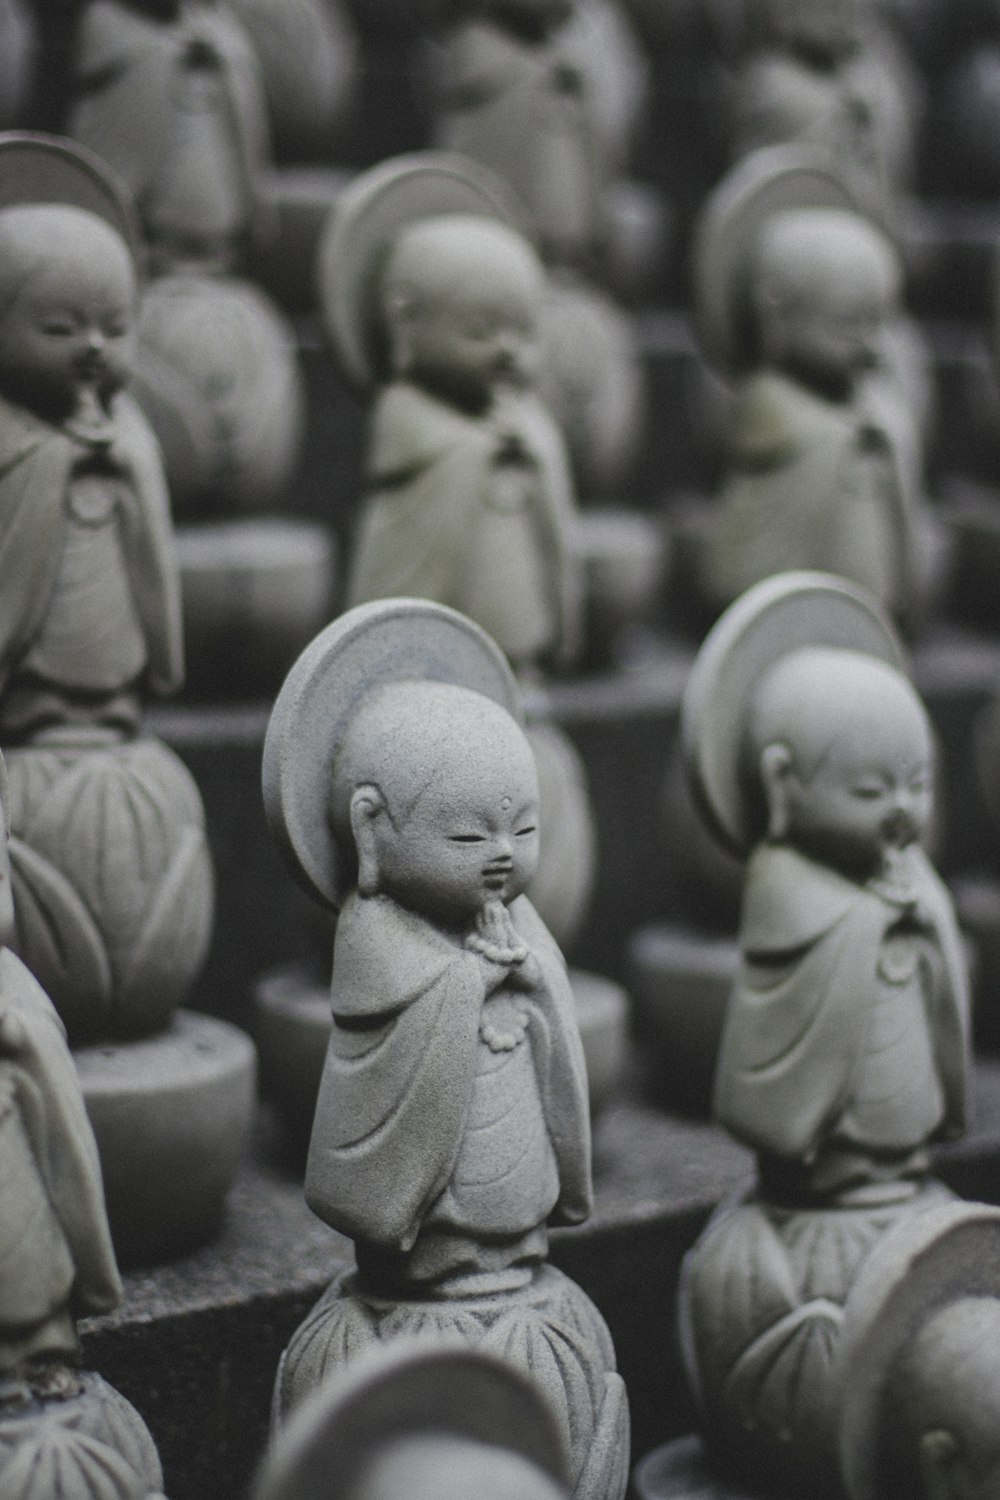 a group of buddha statues sitting next to each other